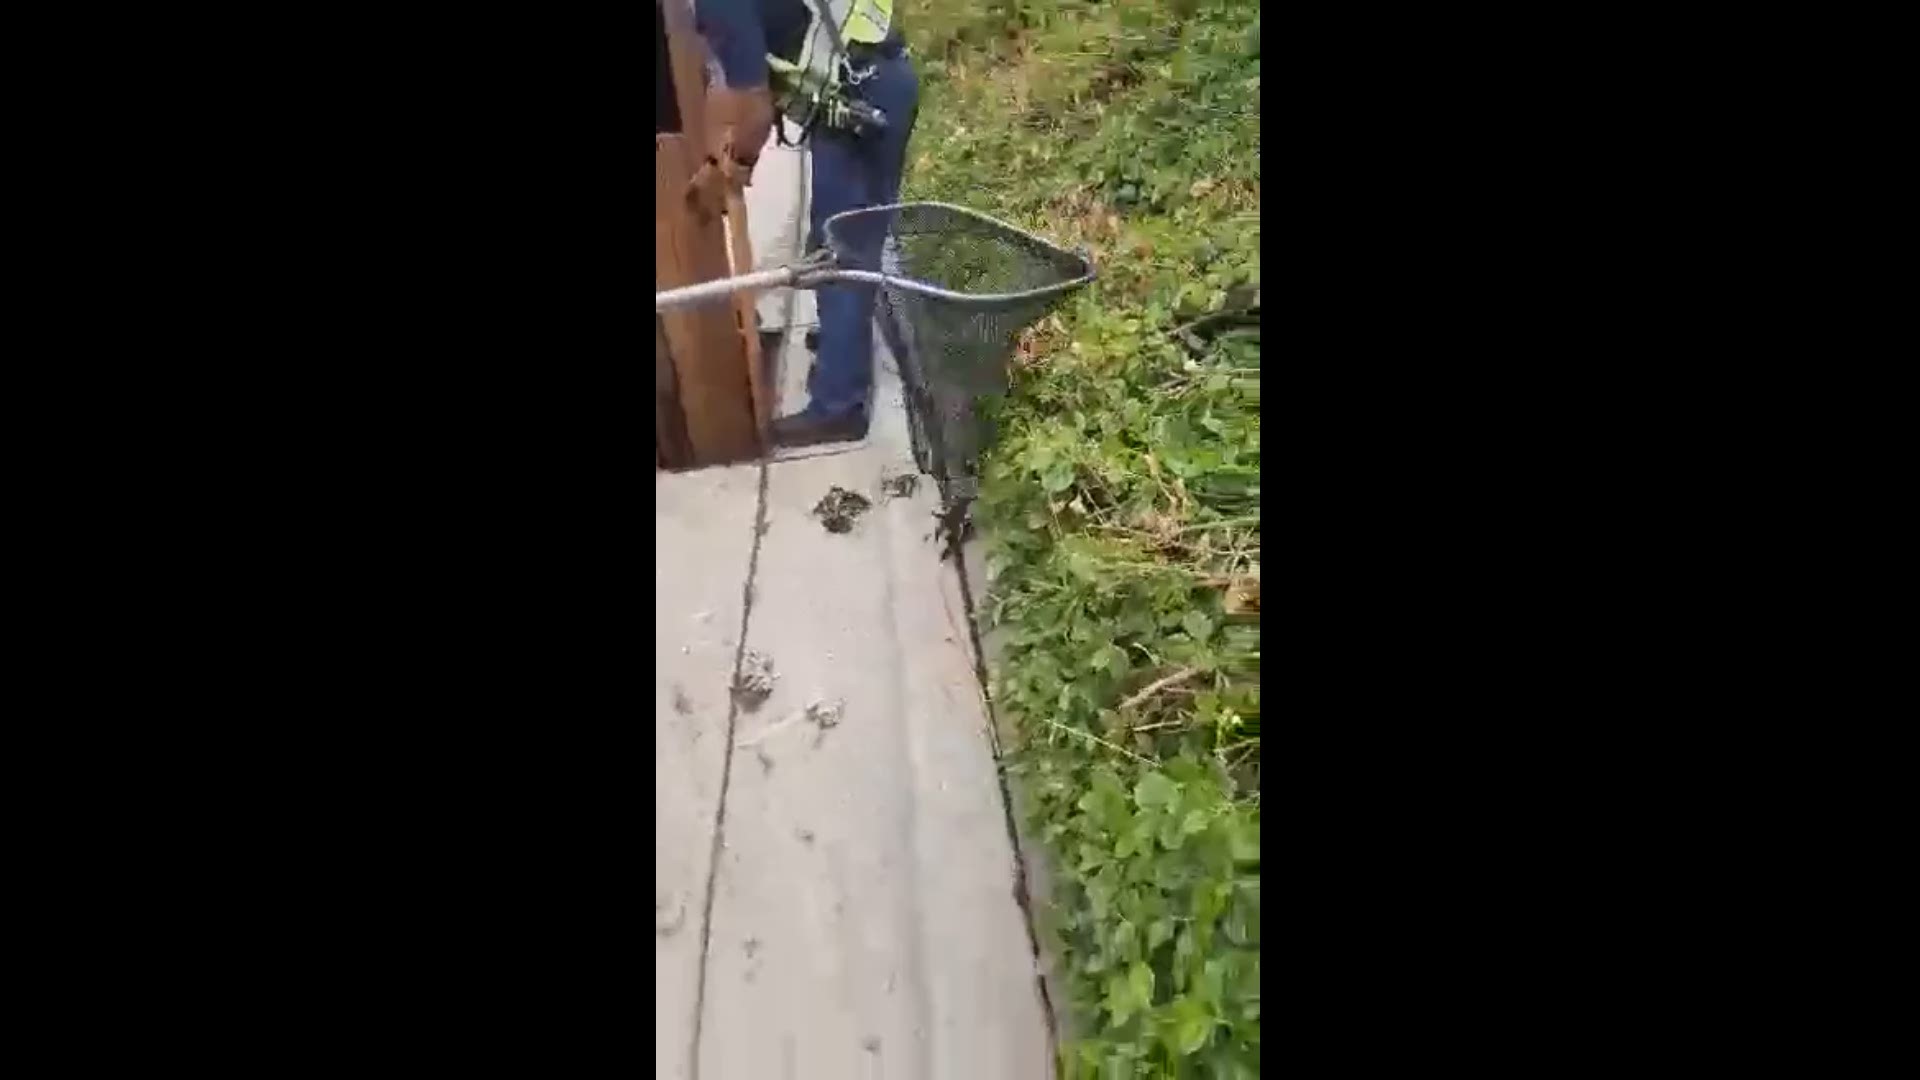 West Metro Fire and Jefferson County Sheriff's Office Animal Control assisted in reuniting the ducklings with their mom. (Video courtesy: Tommy Ashe)